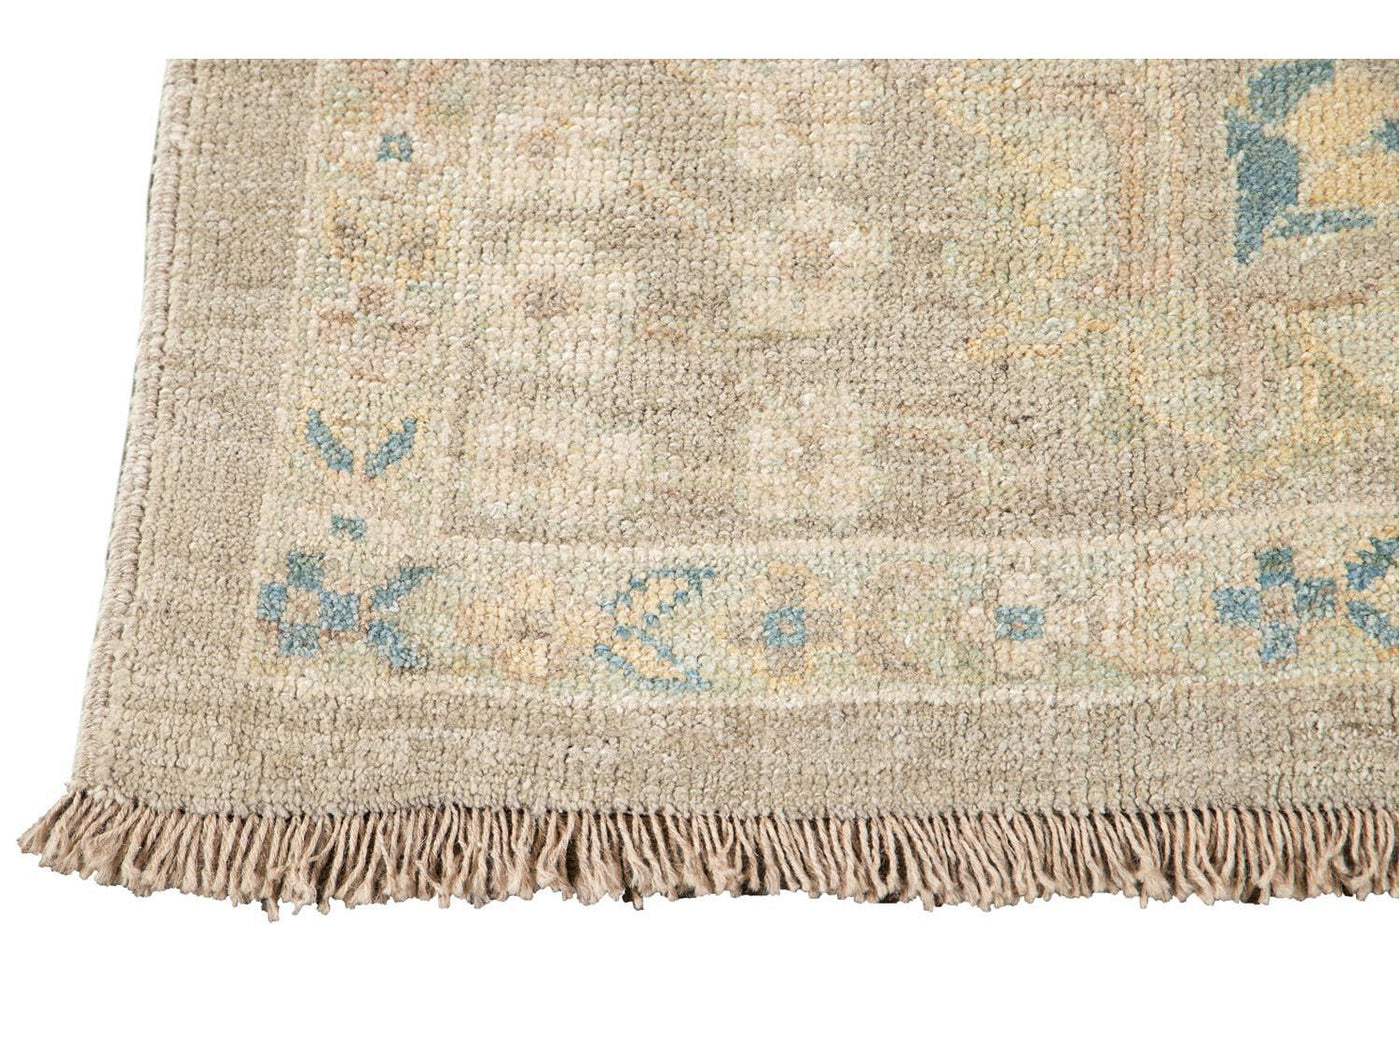 Contemporary Sultanabad Wool Rug 7 X 10